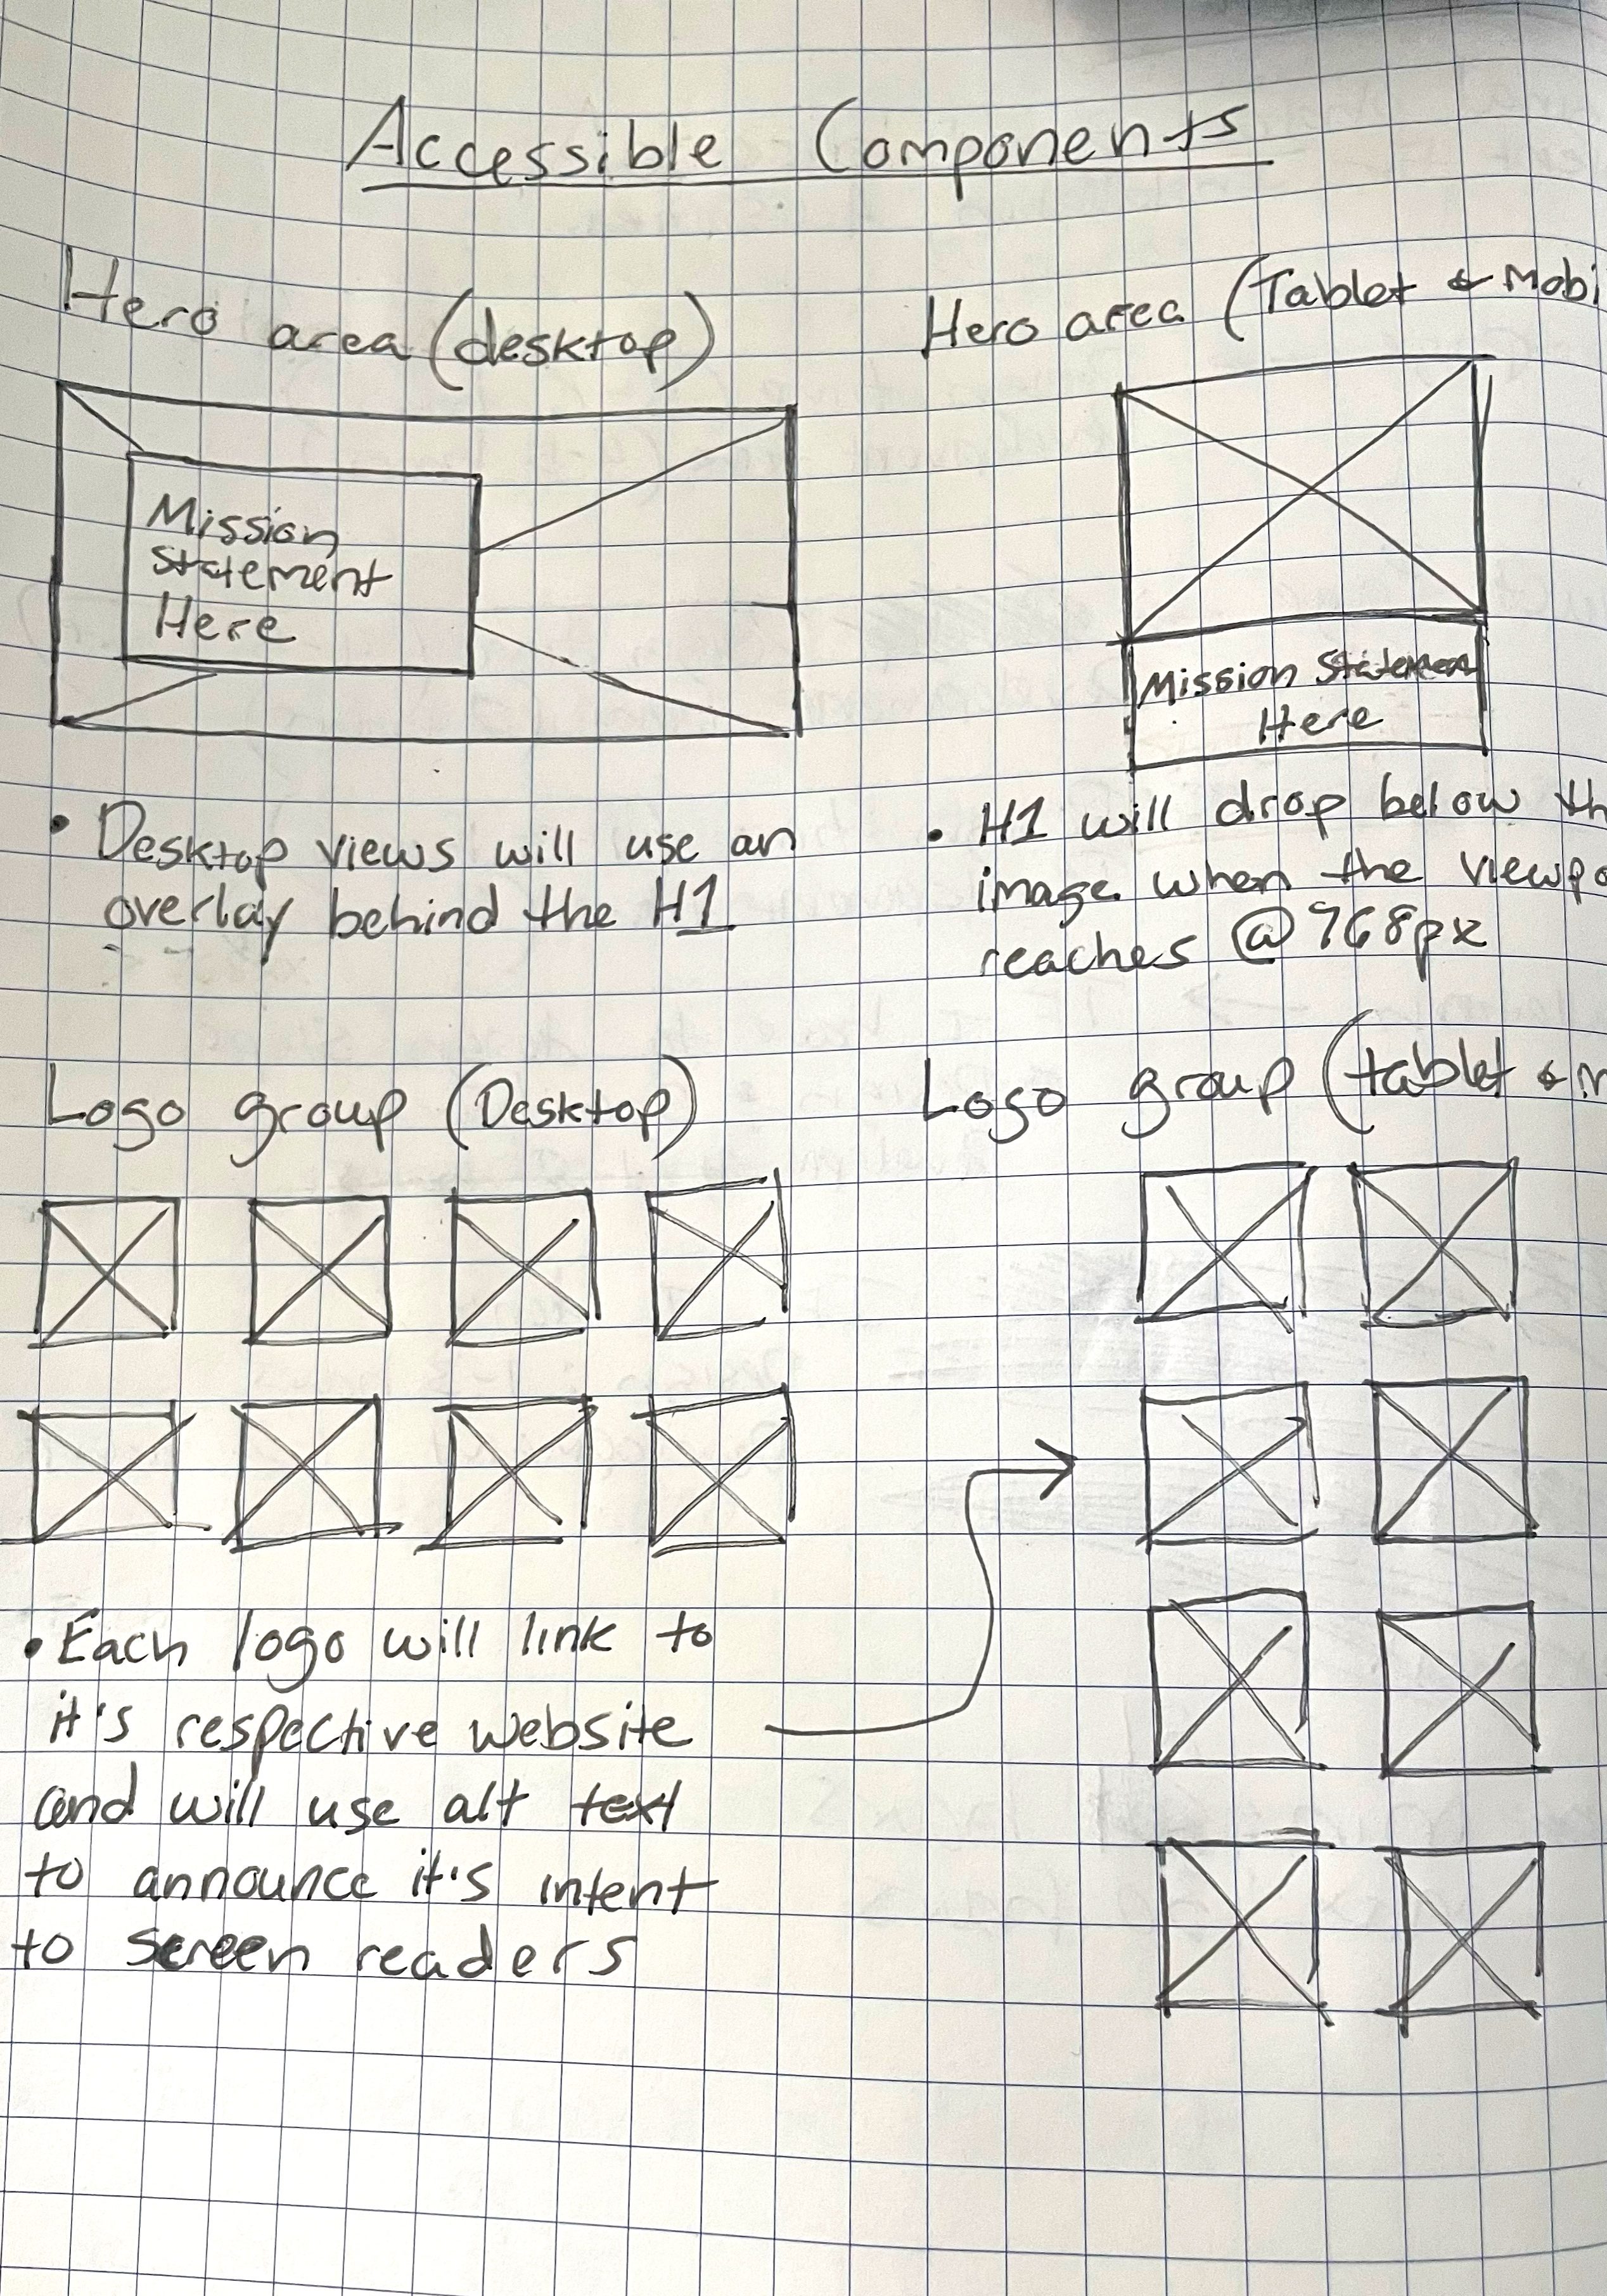 A quick sketch that outlines what accessibility features are built into the hero area and logo group components.